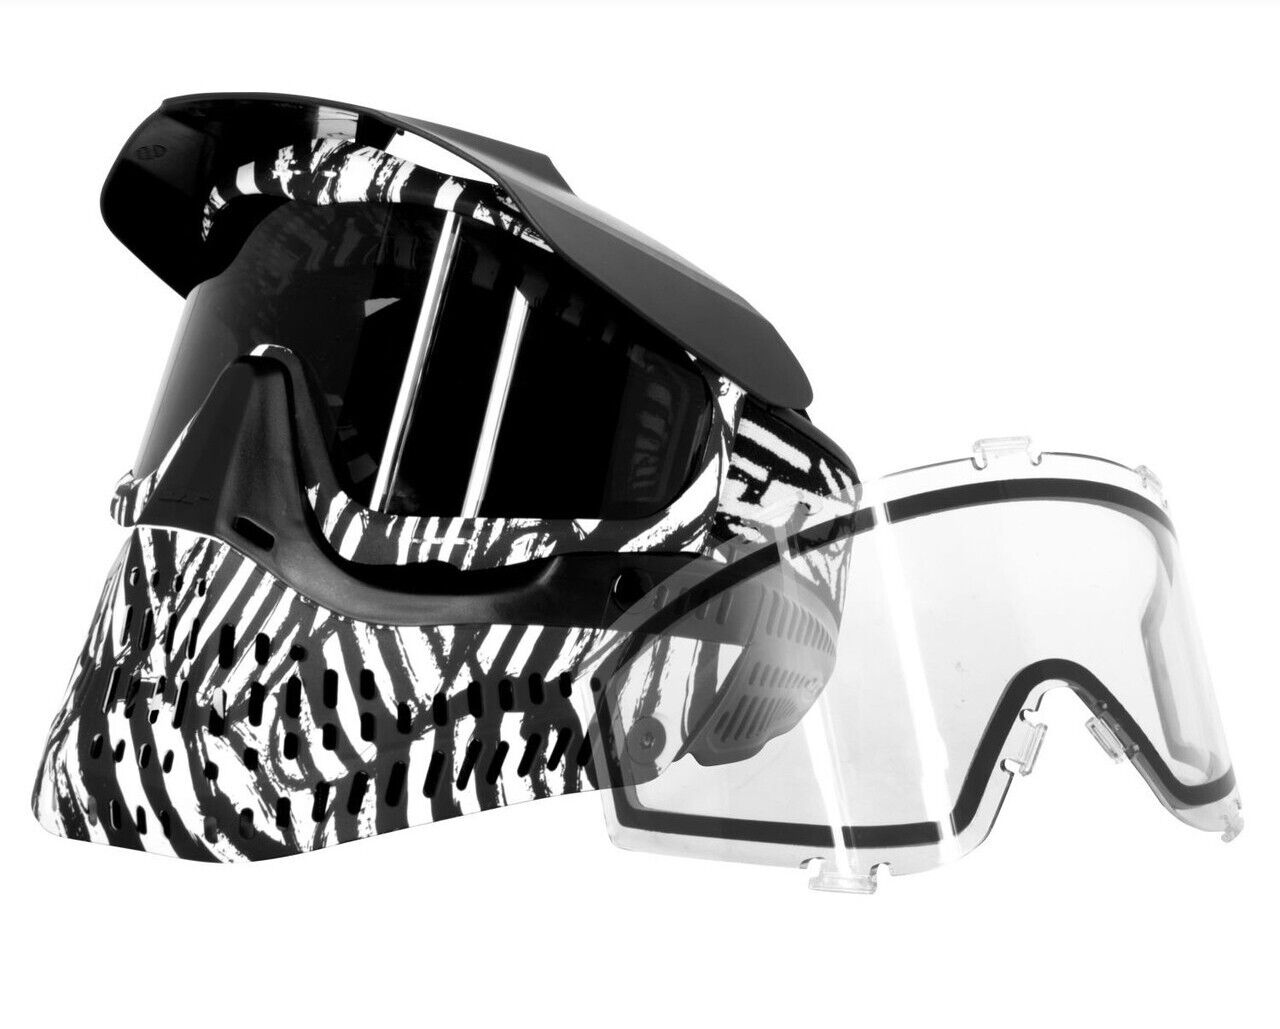 JT Spectra Proflex LE Goggle - Zebra w/ Clear and Smoke Thermal Lens